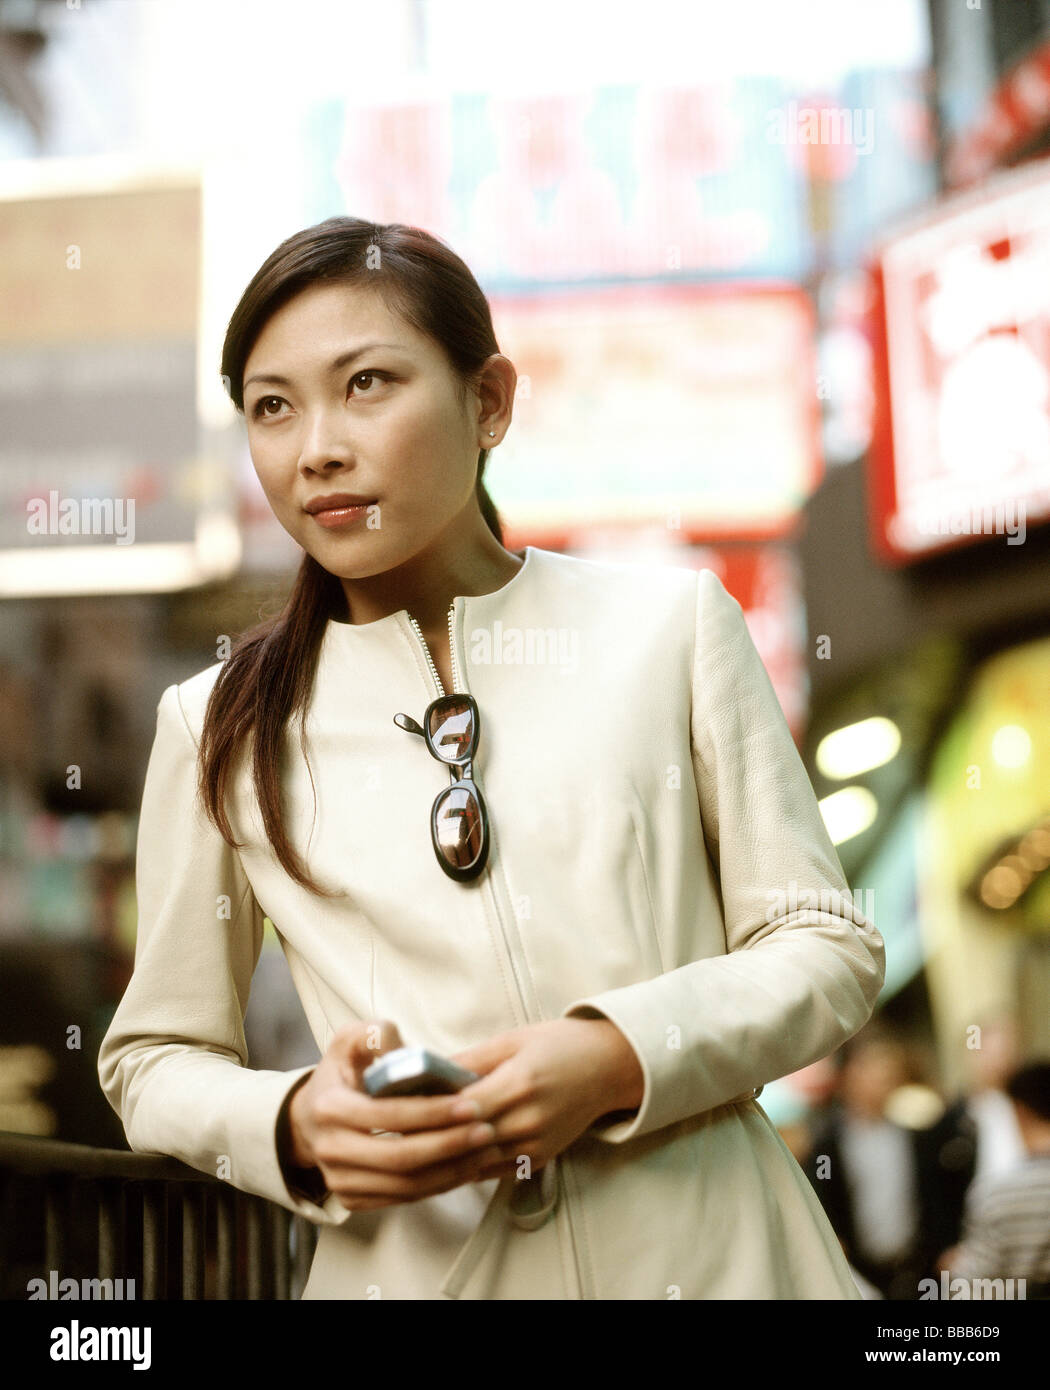 Woman holding cellular phone in busy street. Stock Photo